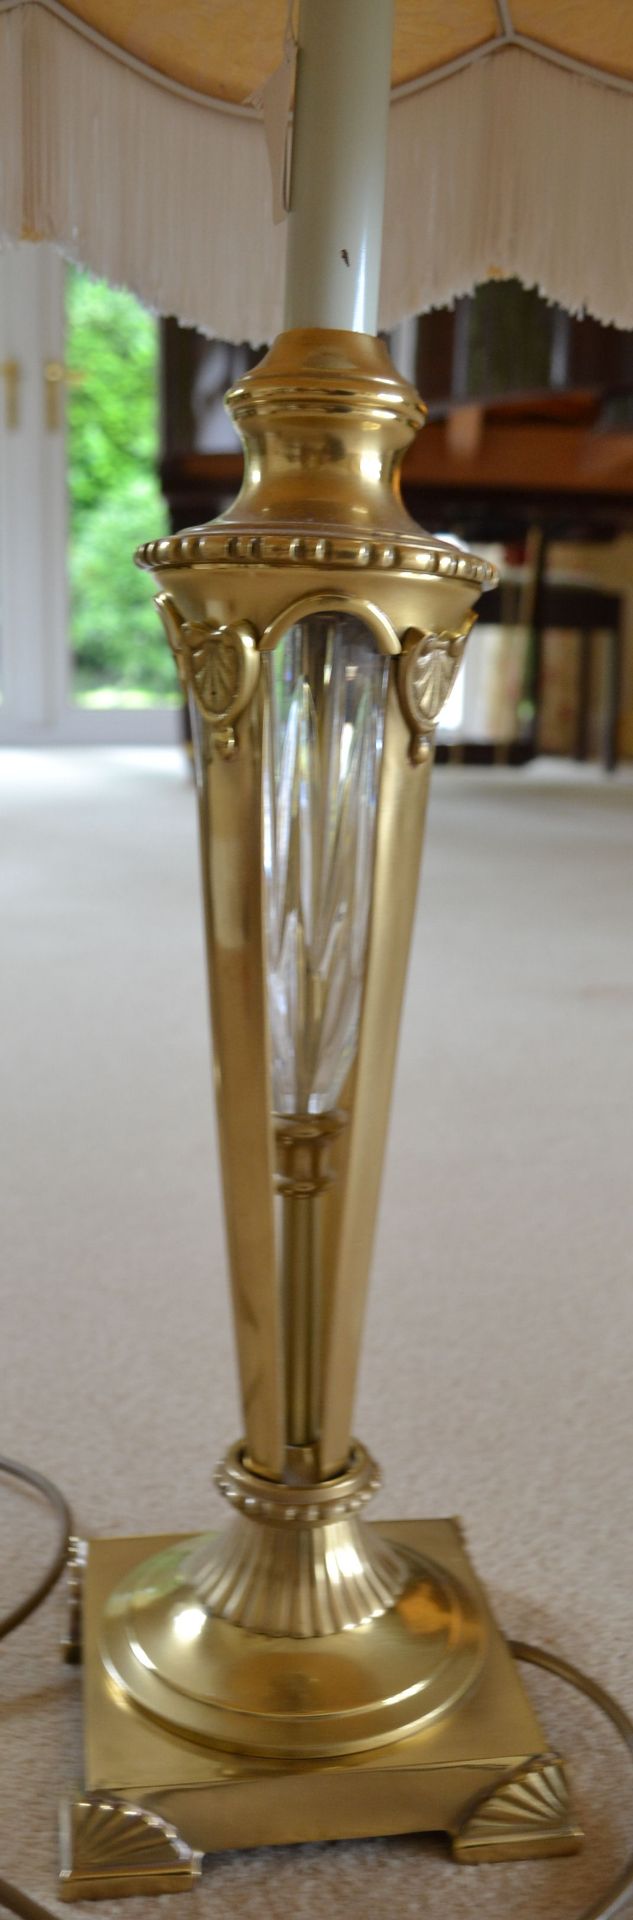 1 x Art Deco Style Lamp in Gold - CL226 - Location: Knutsford WA16 - NO VAT ON THE HAMMER Includes - Image 3 of 7